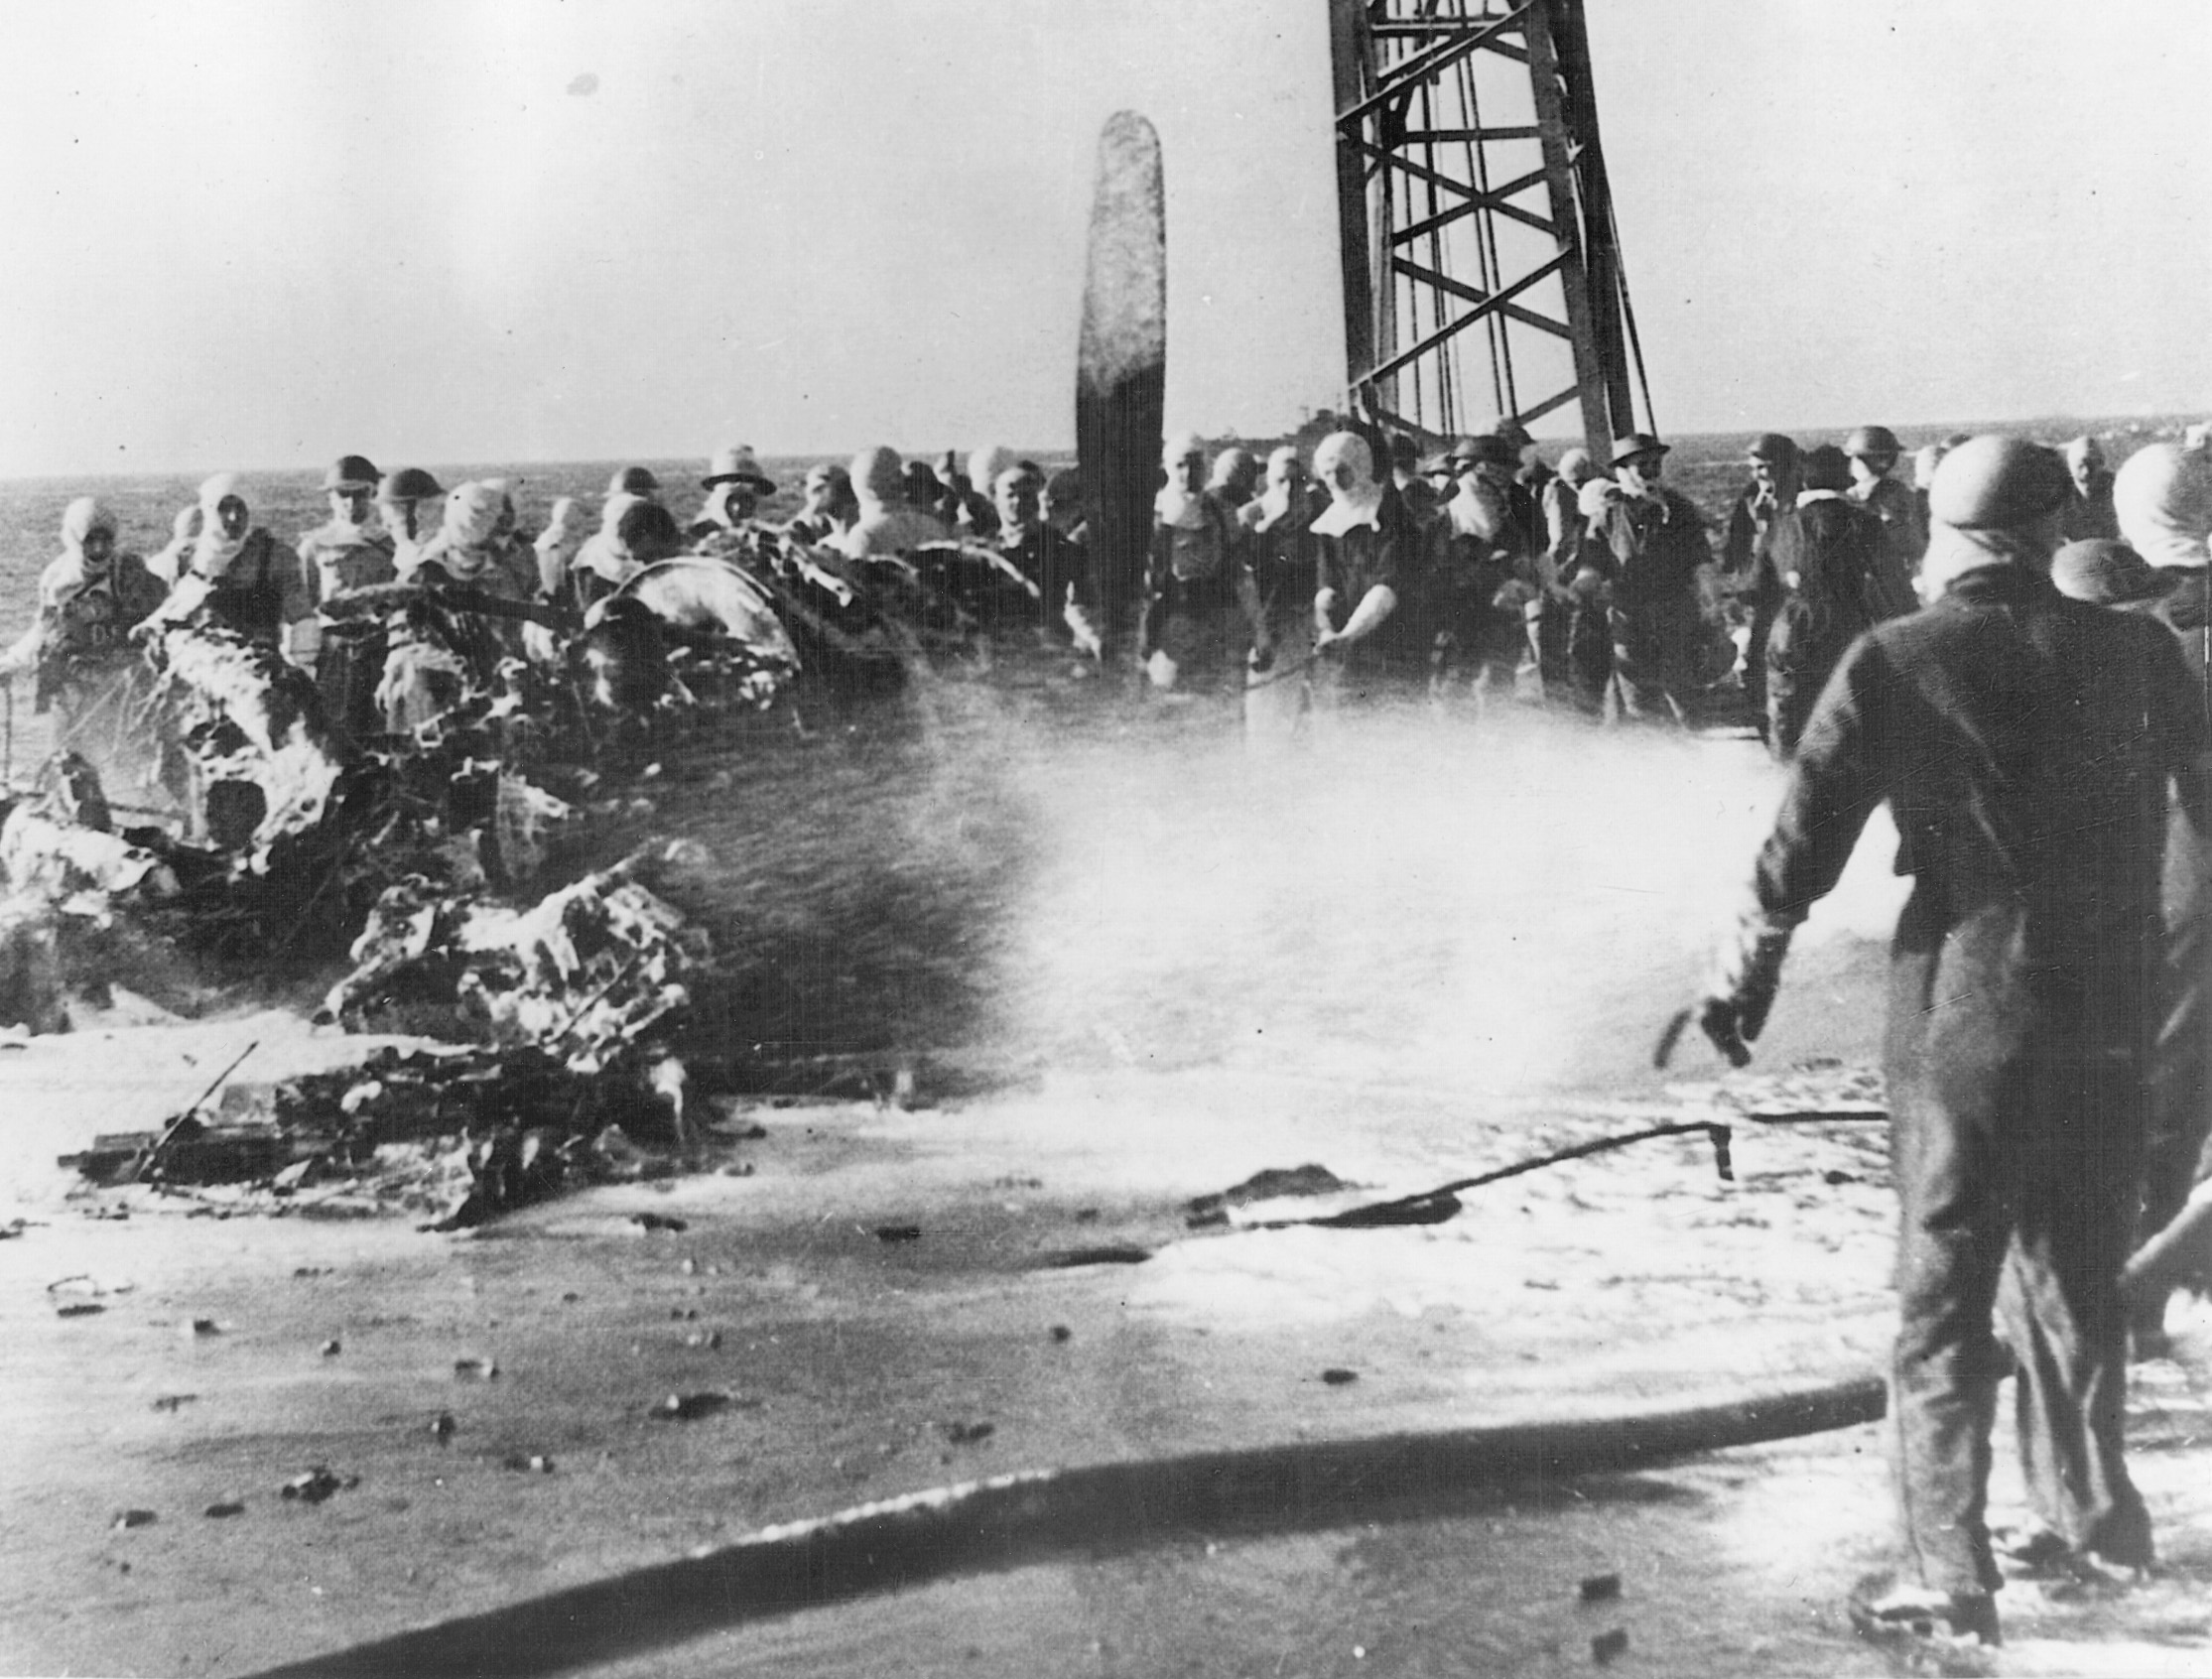 Fireman spray the wreckage of a Japanese kamikaze that has crashed into the armored flight deck of a British aircraft carrier.